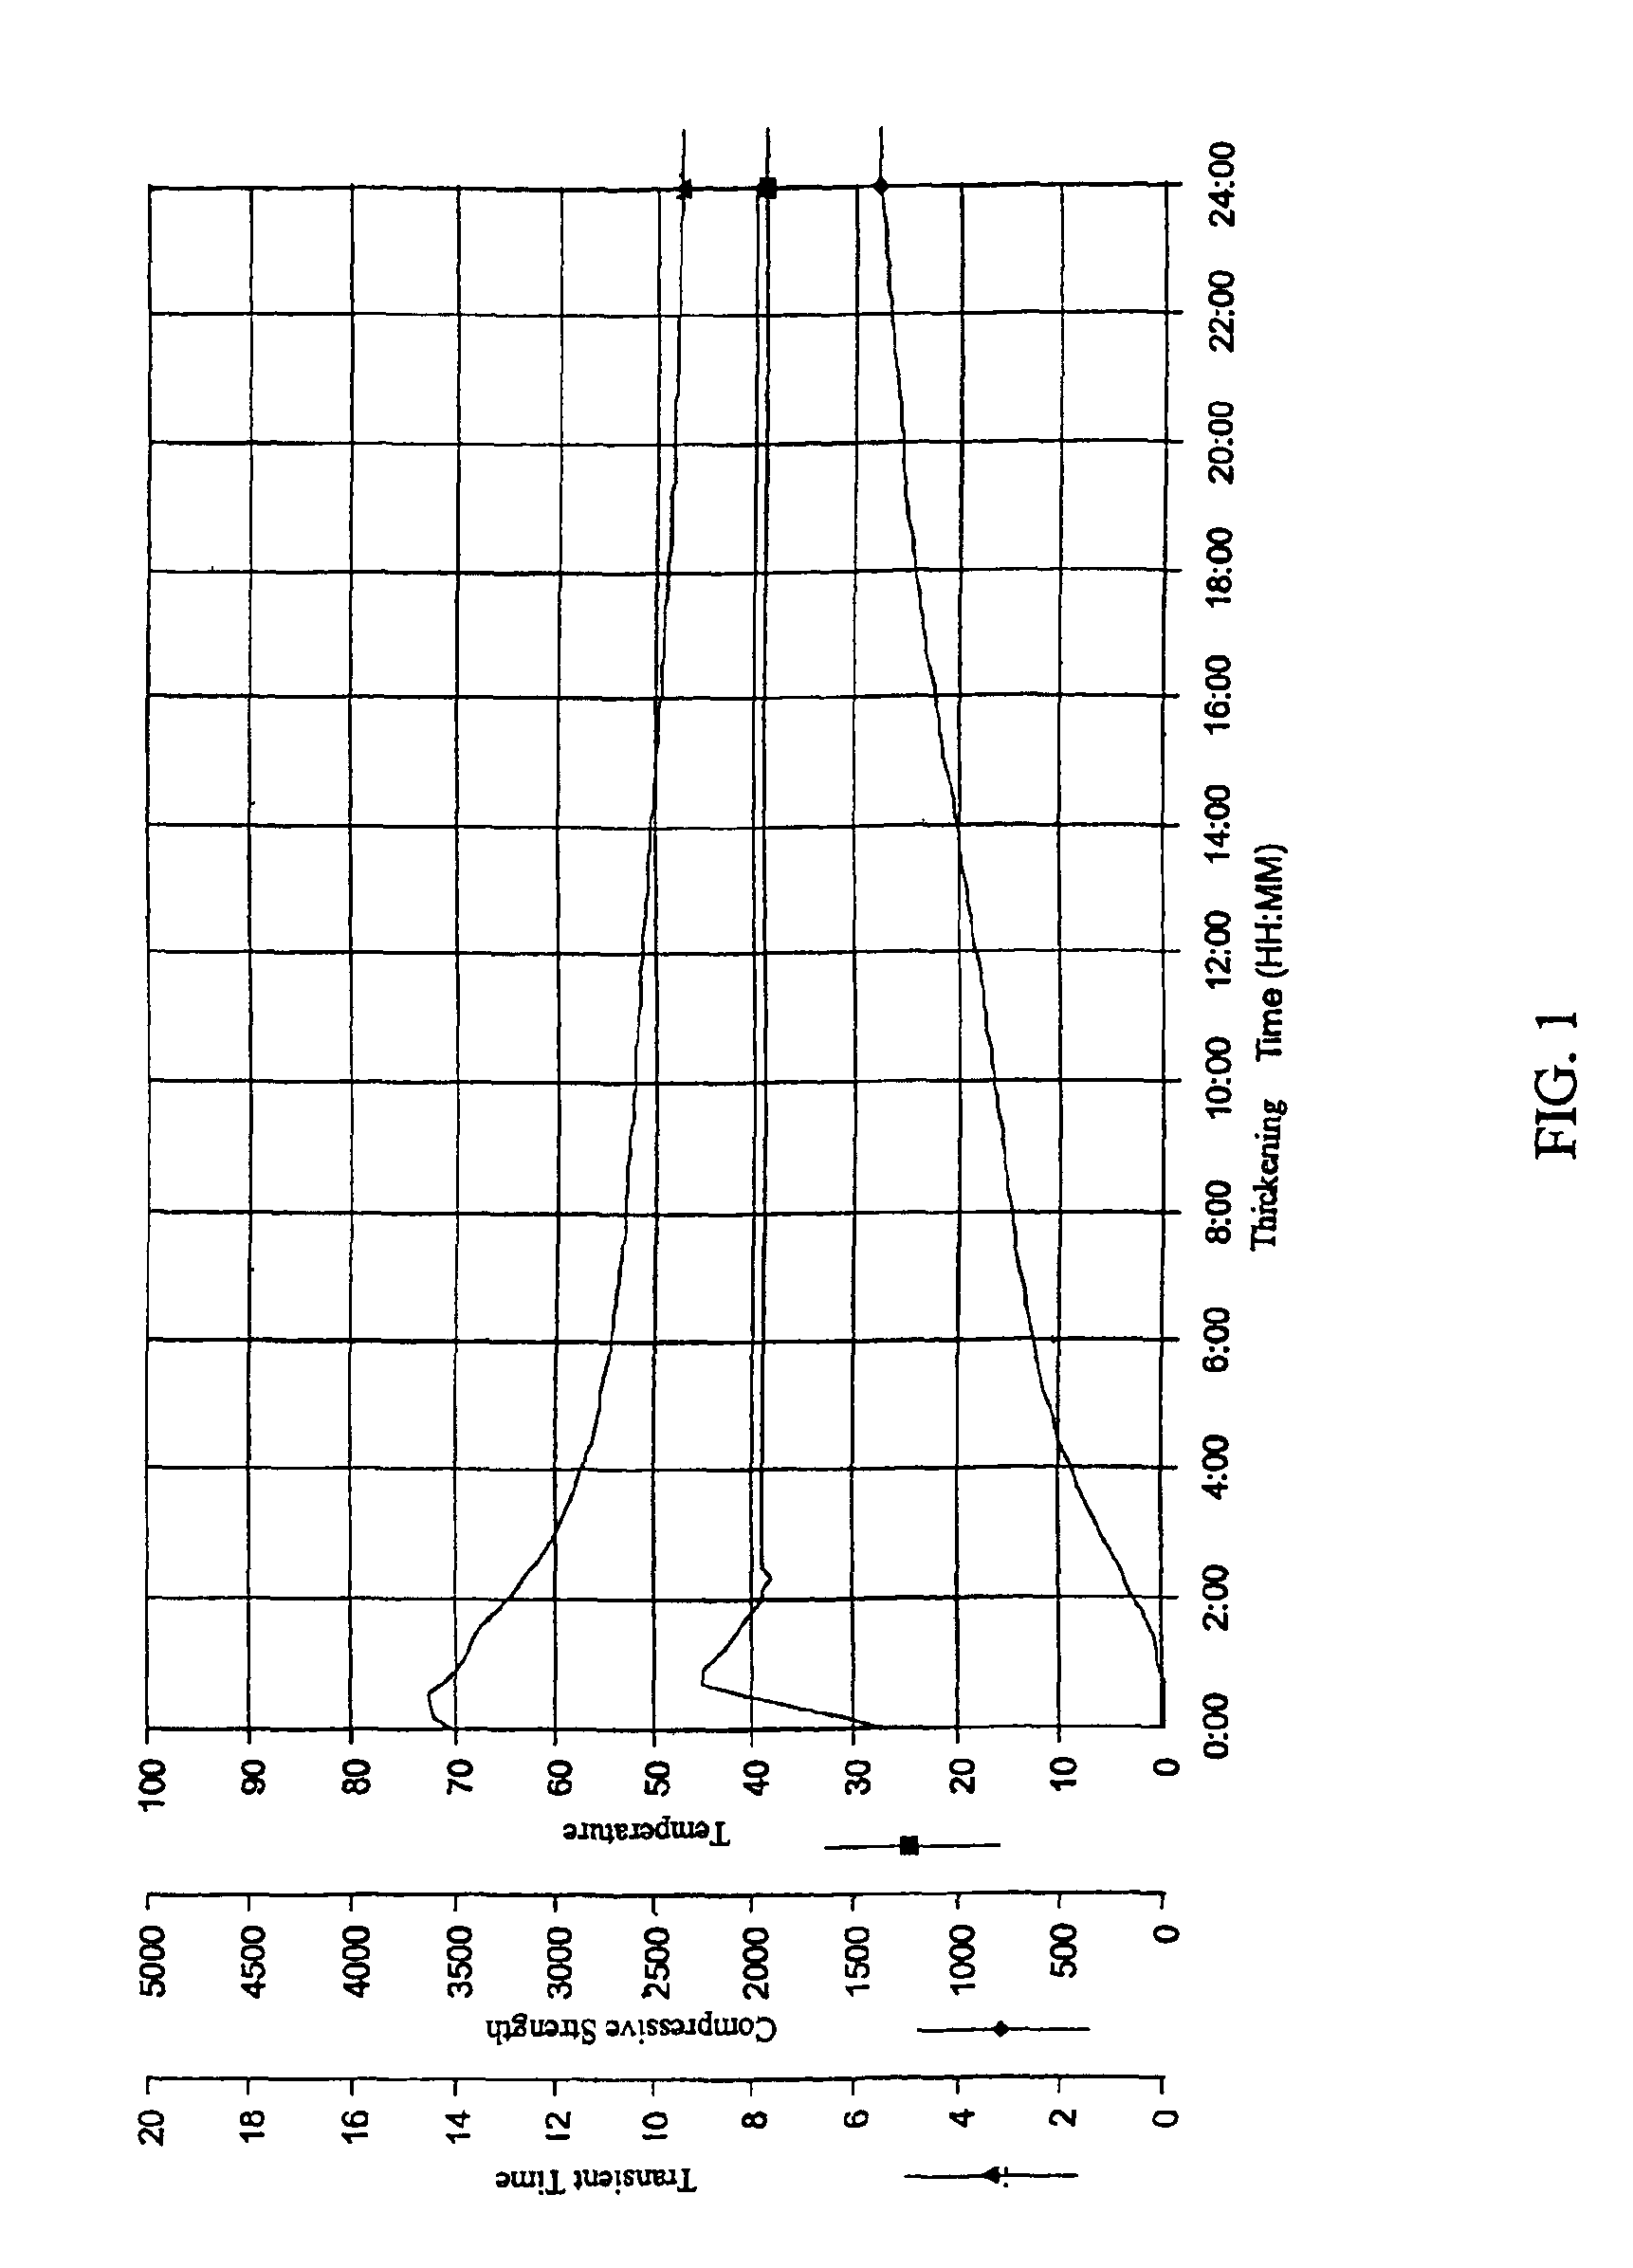 Storable cementitious slurries containing boric acid and method of using the same